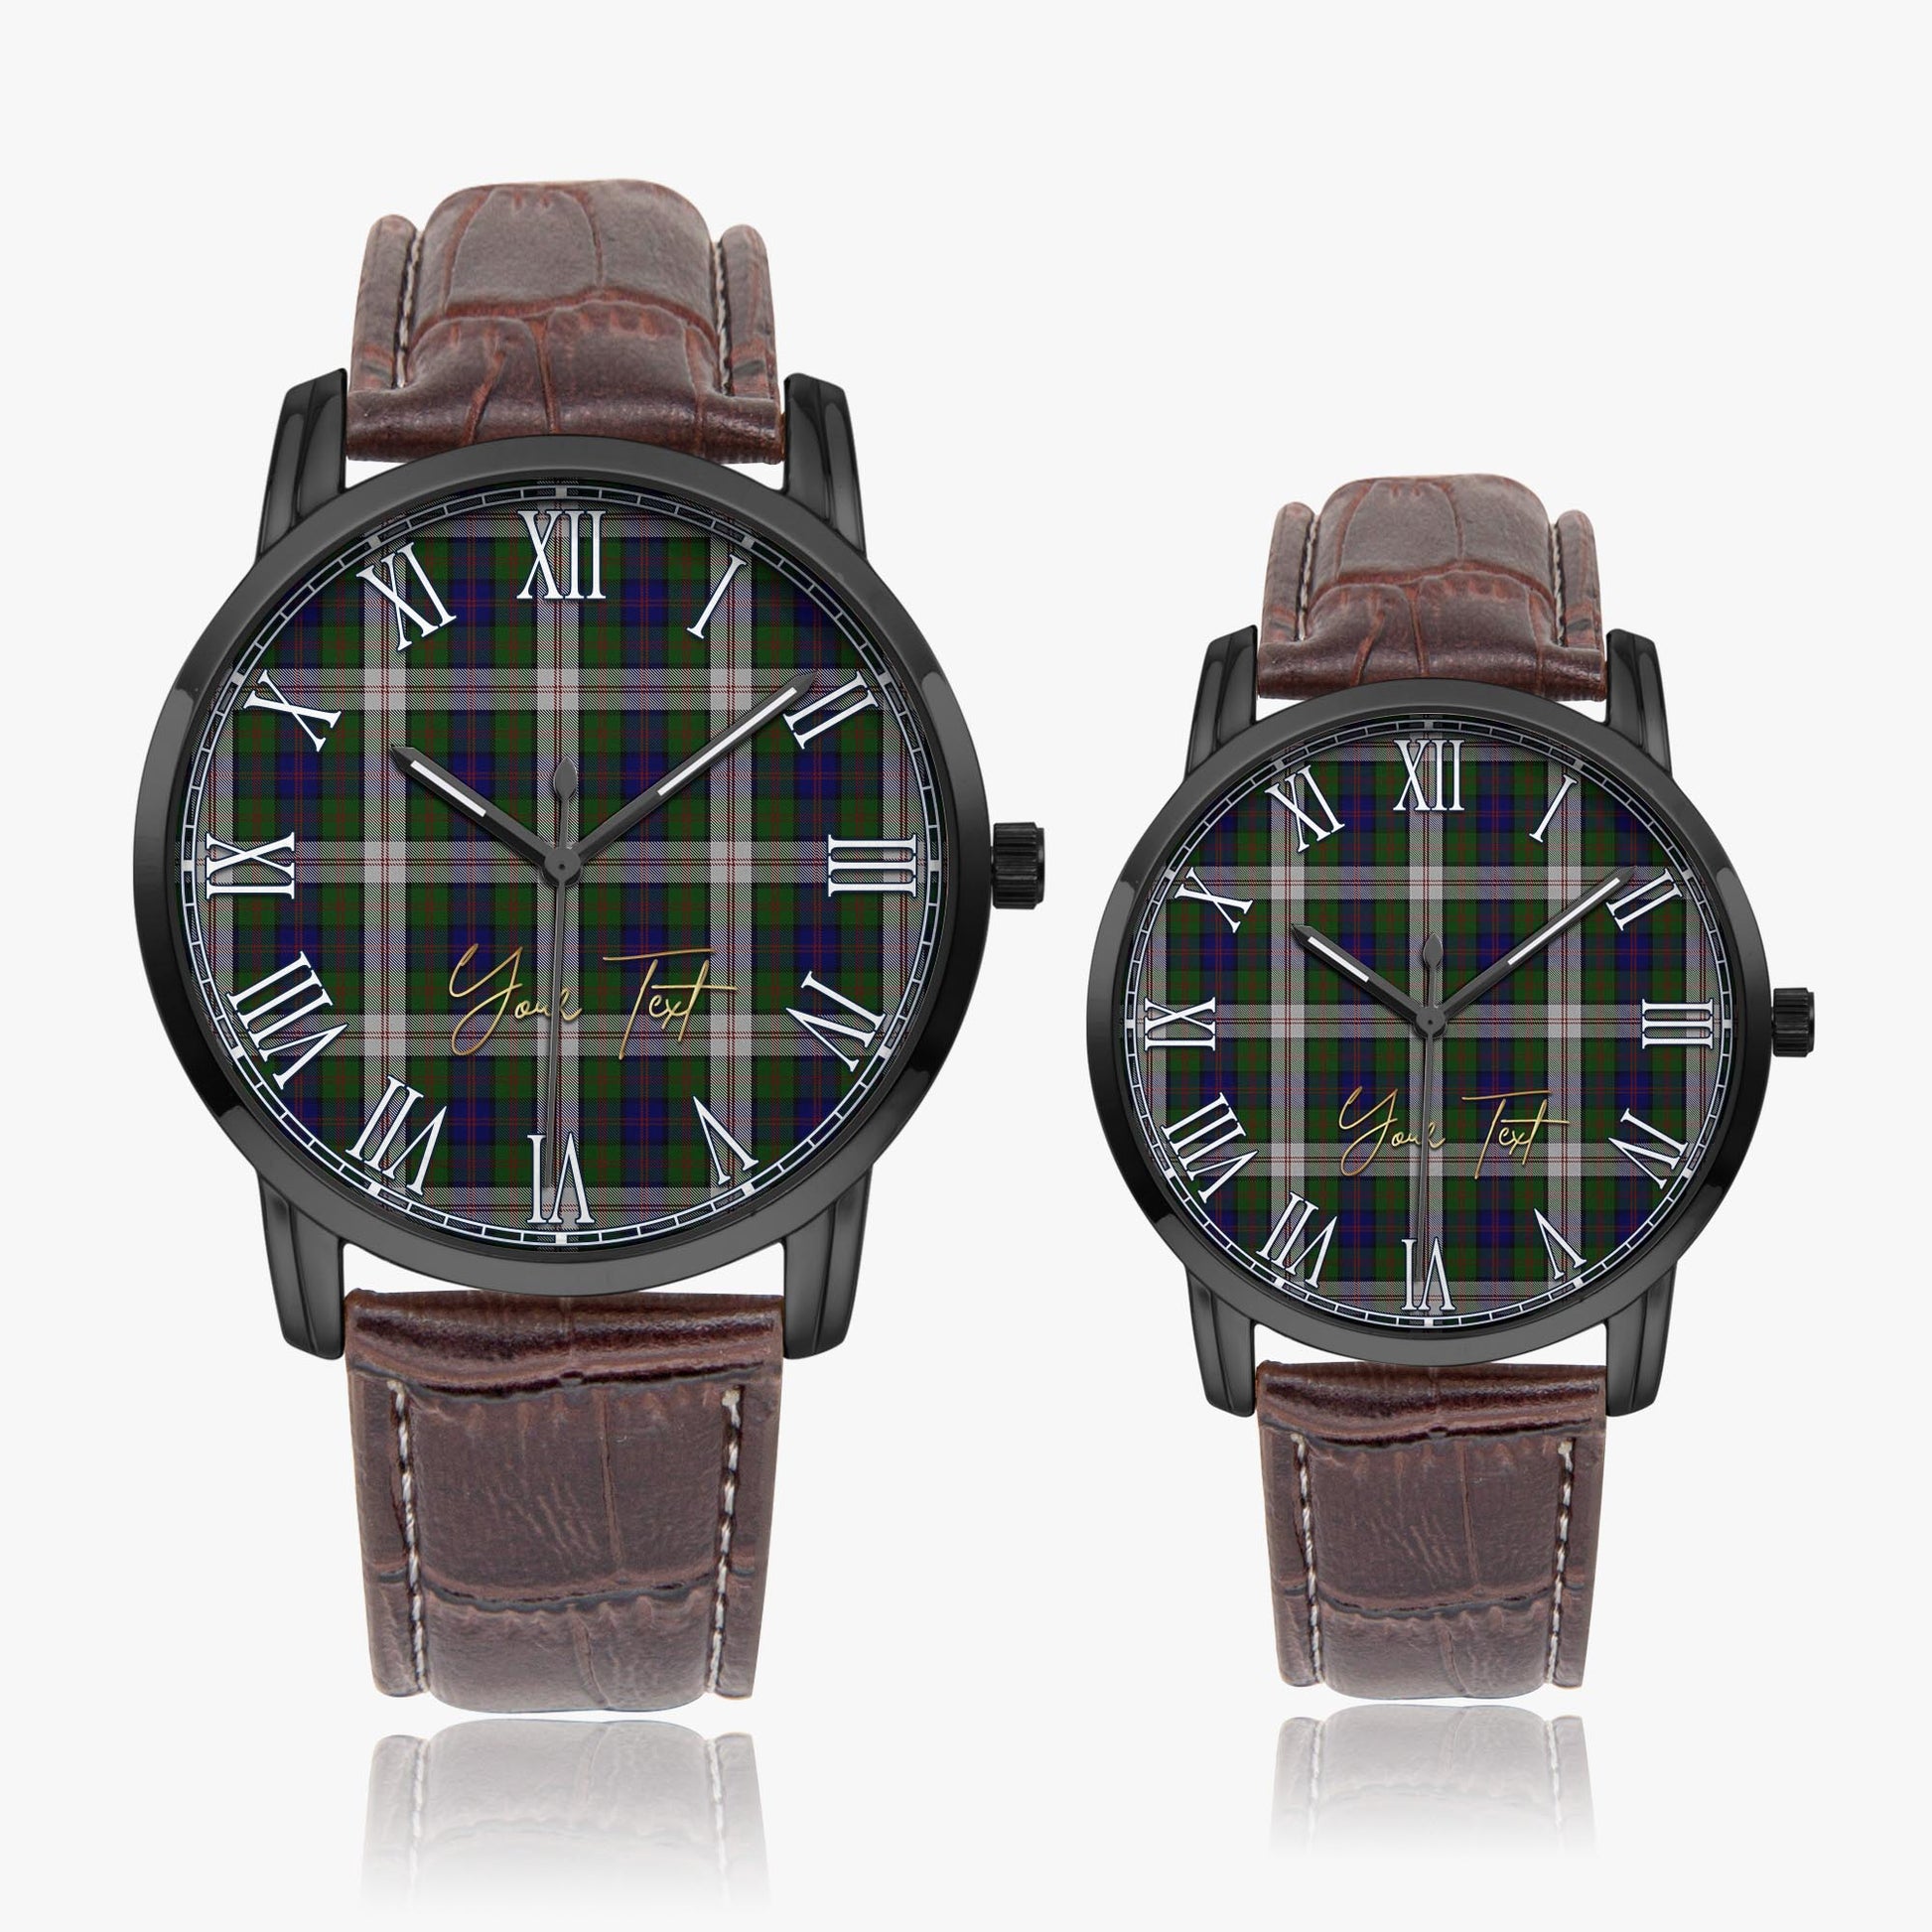 Blair Dress Tartan Personalized Your Text Leather Trap Quartz Watch Wide Type Black Case With Brown Leather Strap - Tartanvibesclothing